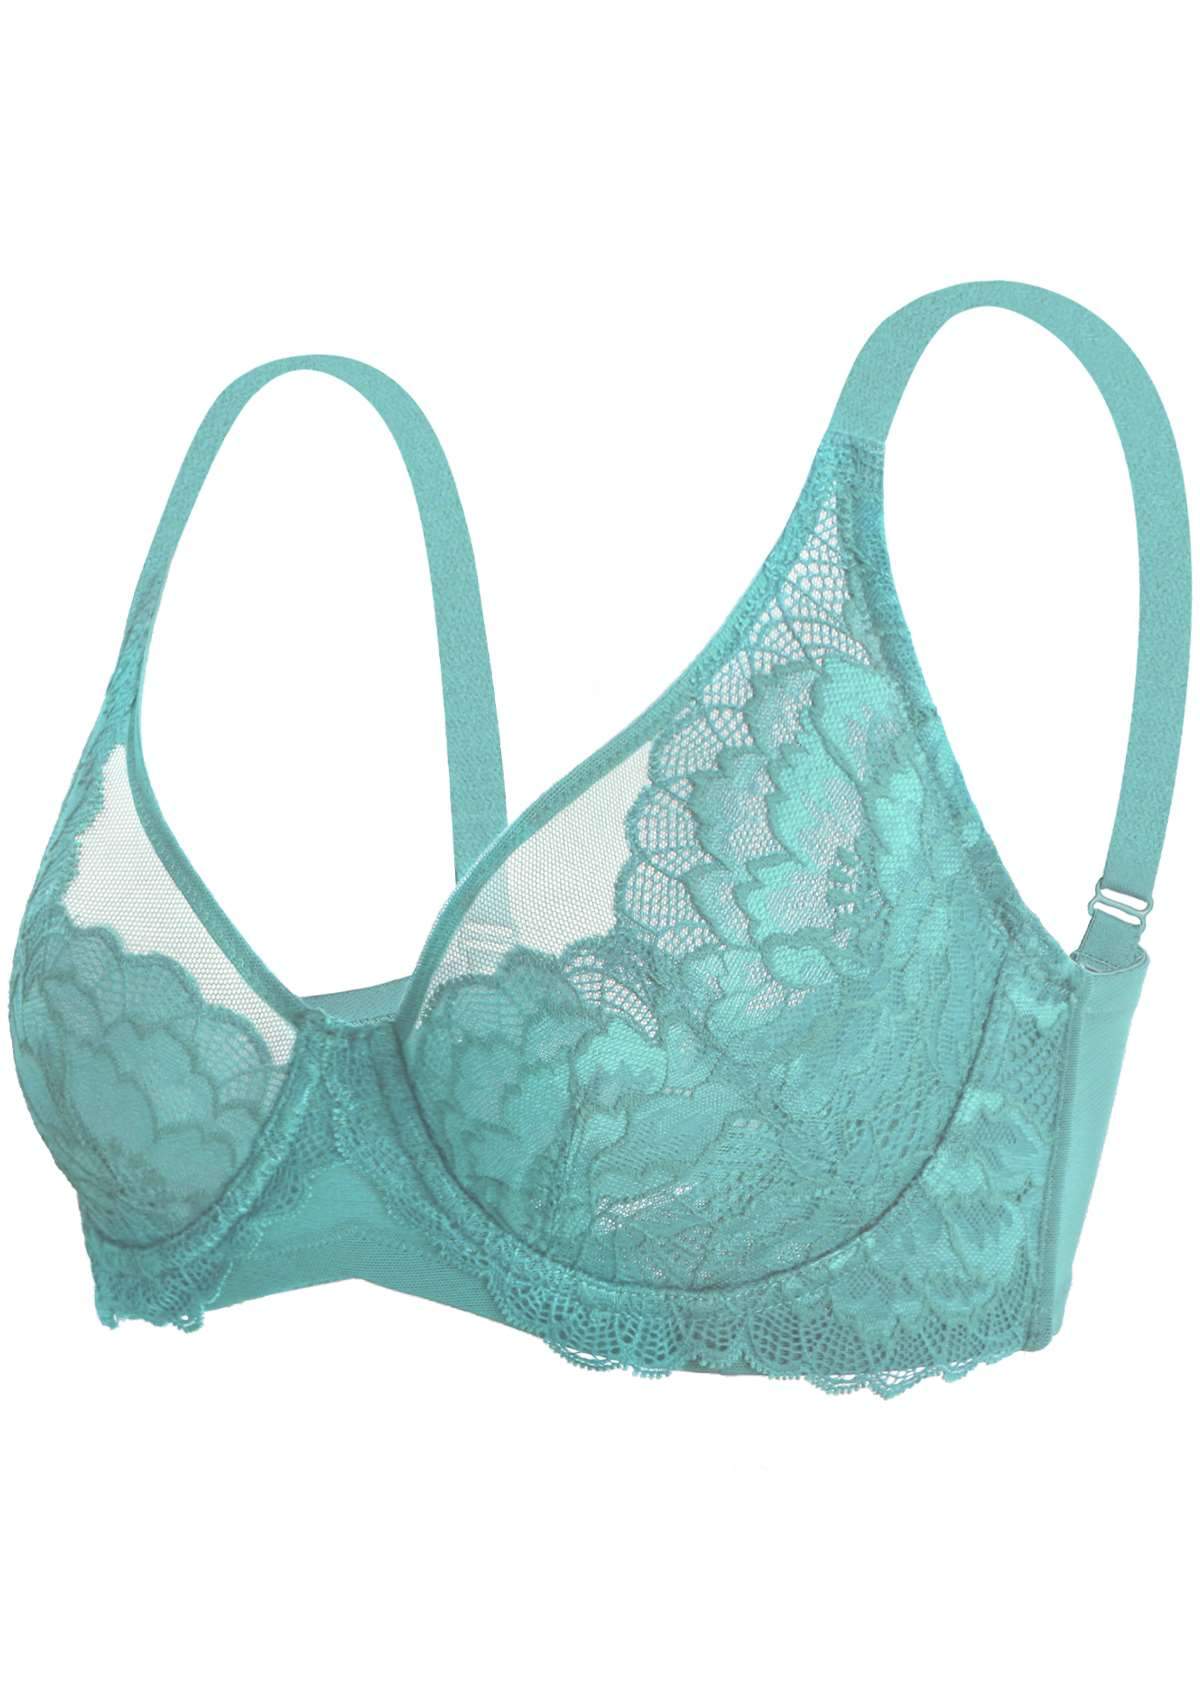 HSIA Paeonia Lace Full Coverage Underwire Non-Padded Uplifting Bra - Light Coral / 36 / C